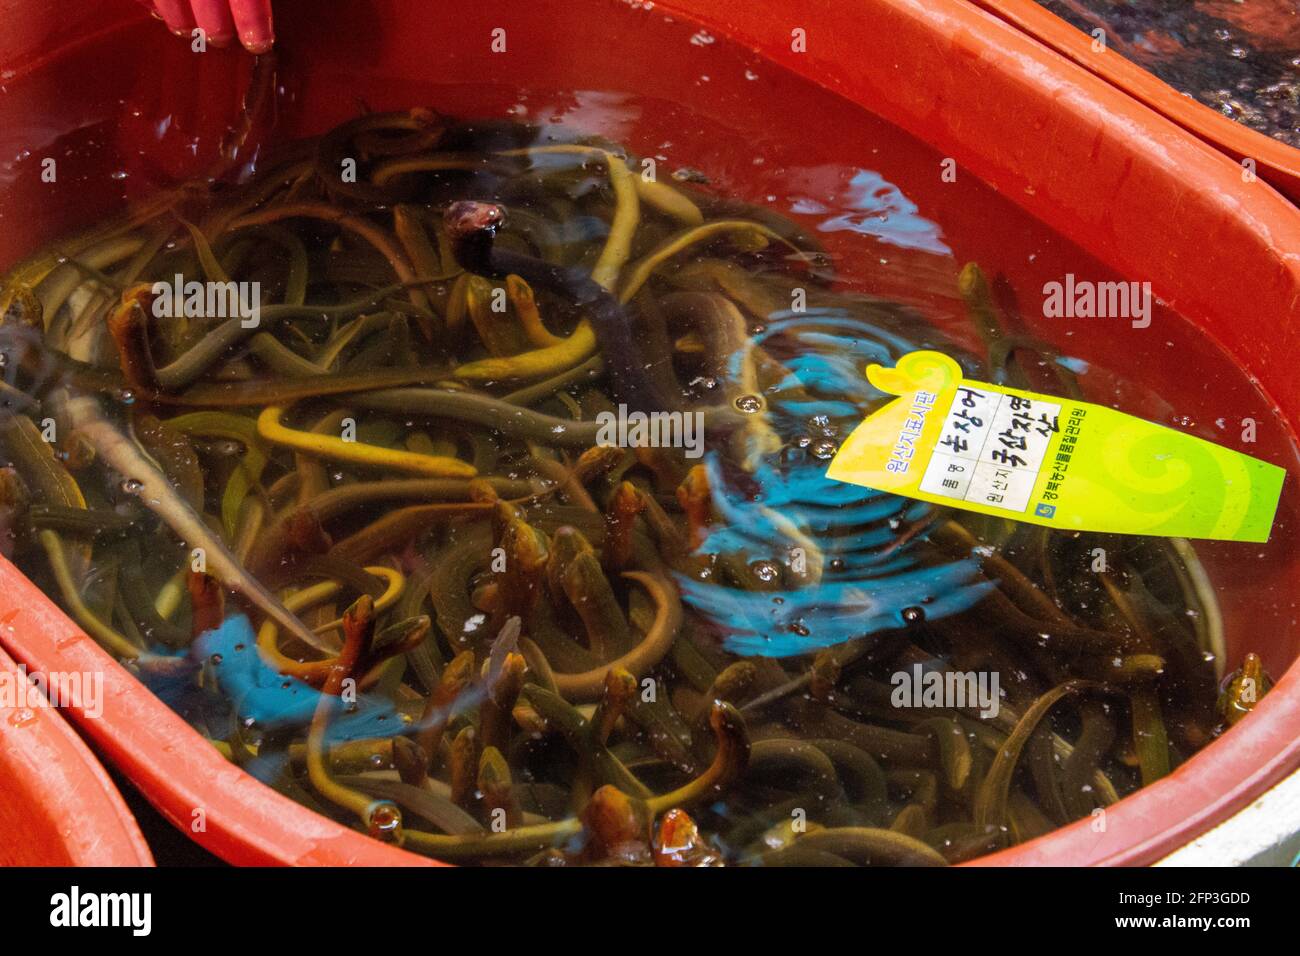 Eels and other fresh seafood being sold at a market in South Korea. Stock Photo